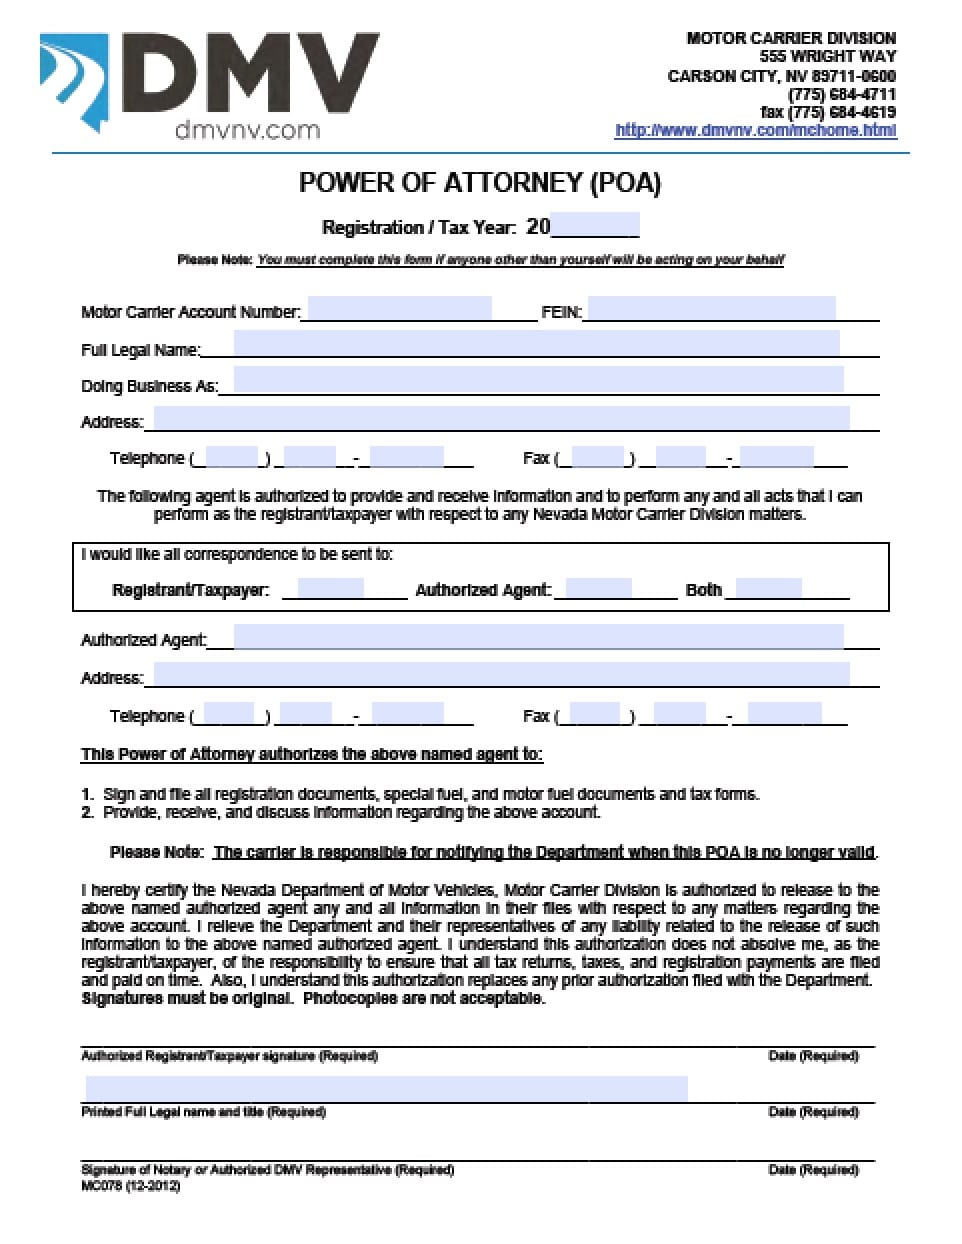 Nevada Vehicle Power of Attorney Form - Power of Attorney : Power of Attorney